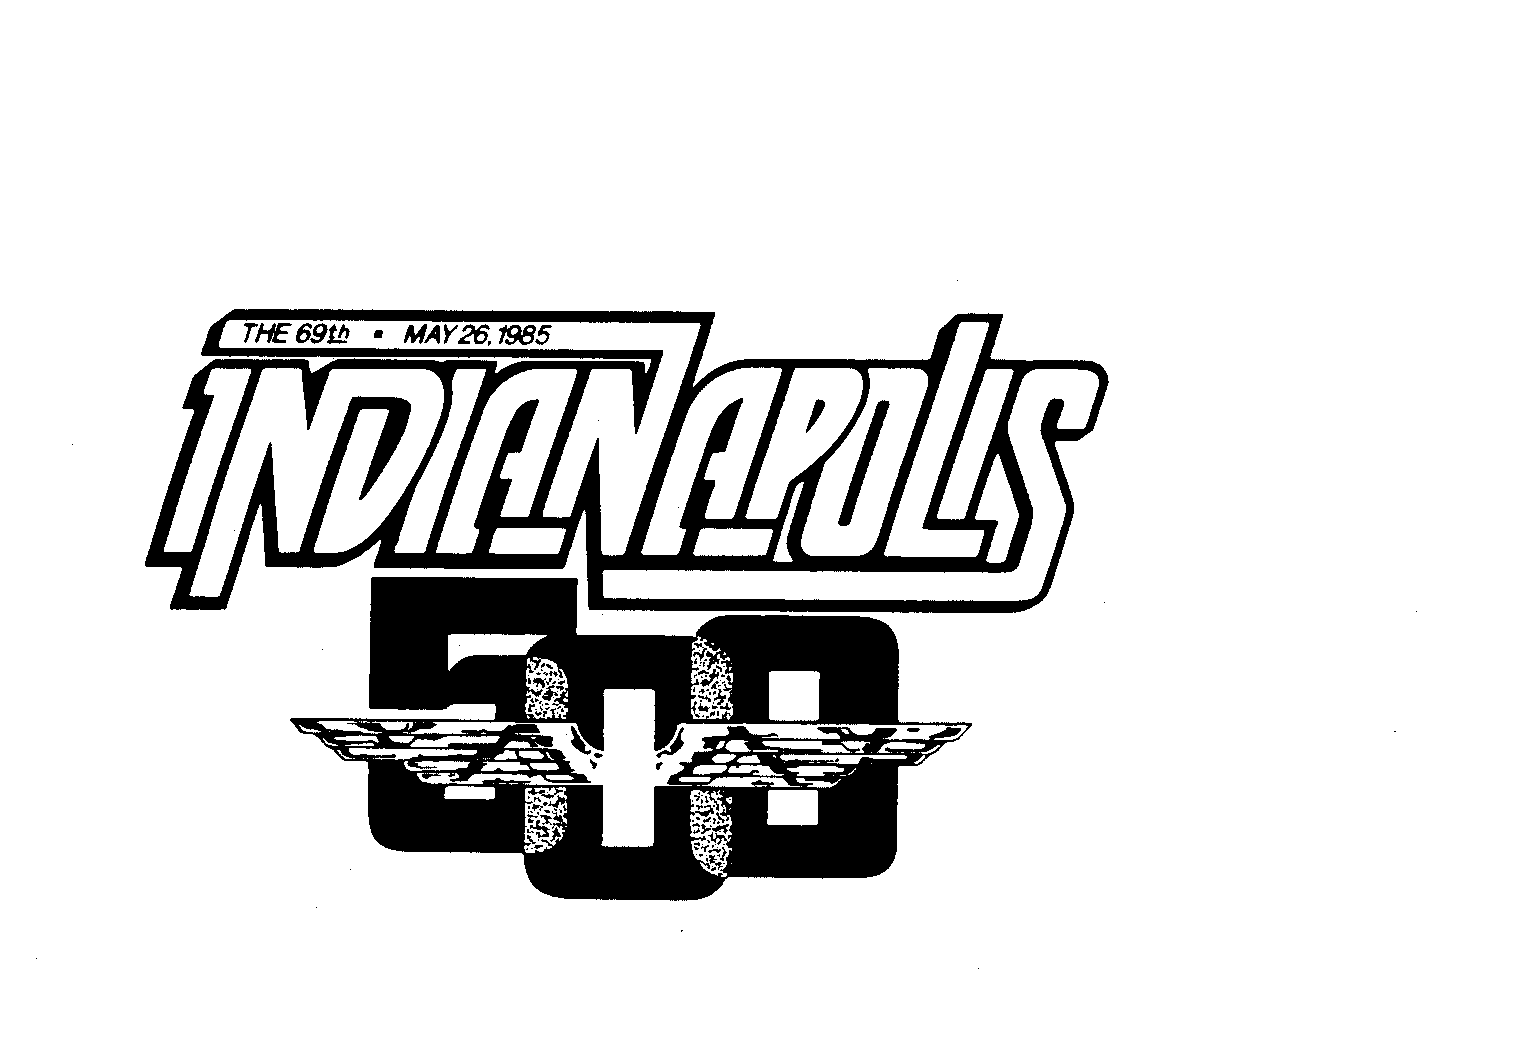  THE 69TH-MAY 26, 1985 INDIANAPOLIS 500